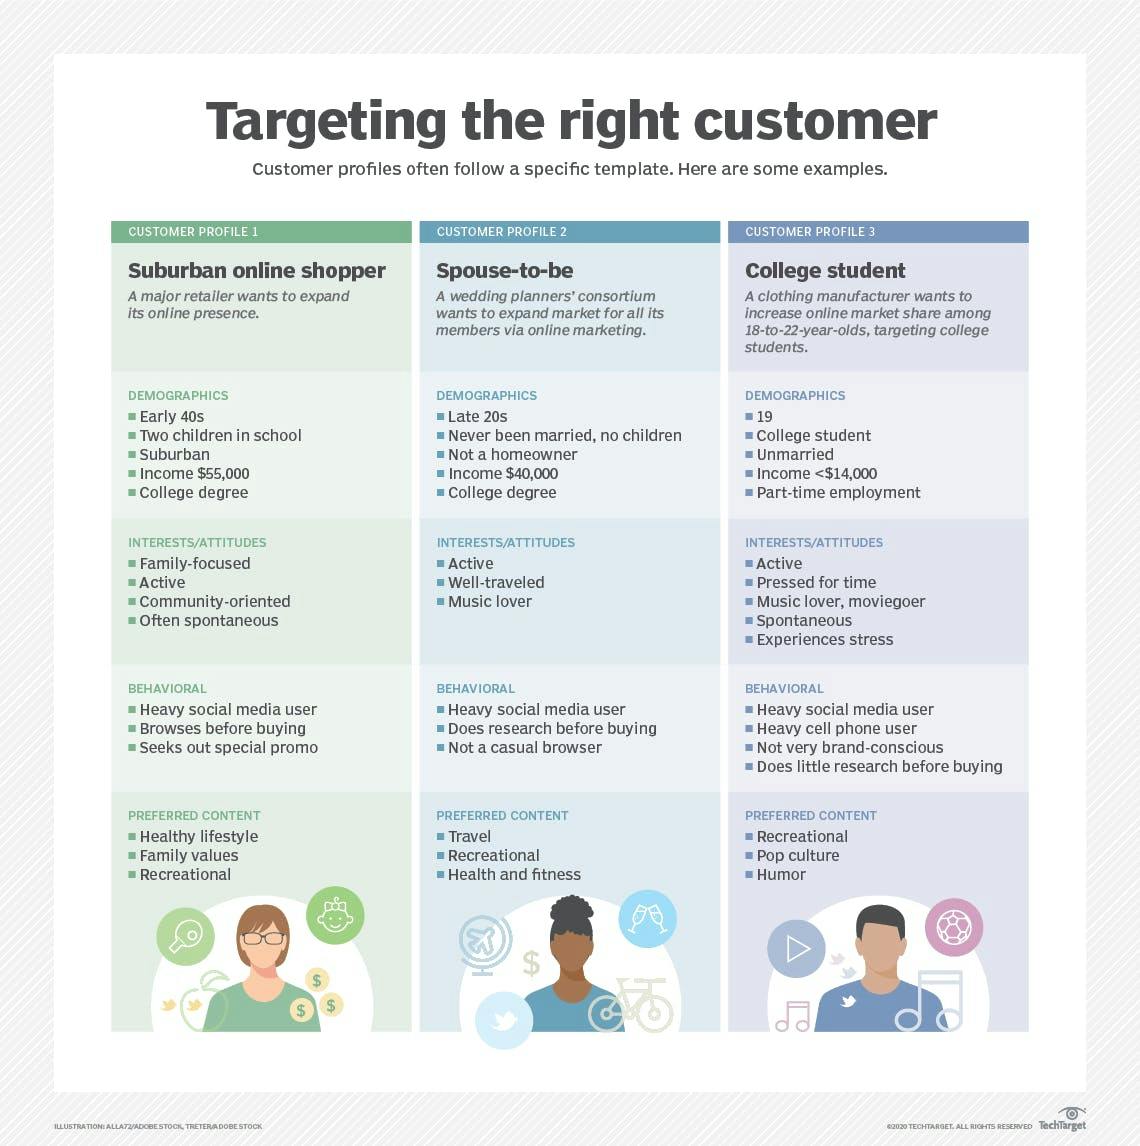 Targeting the right customer infographic.